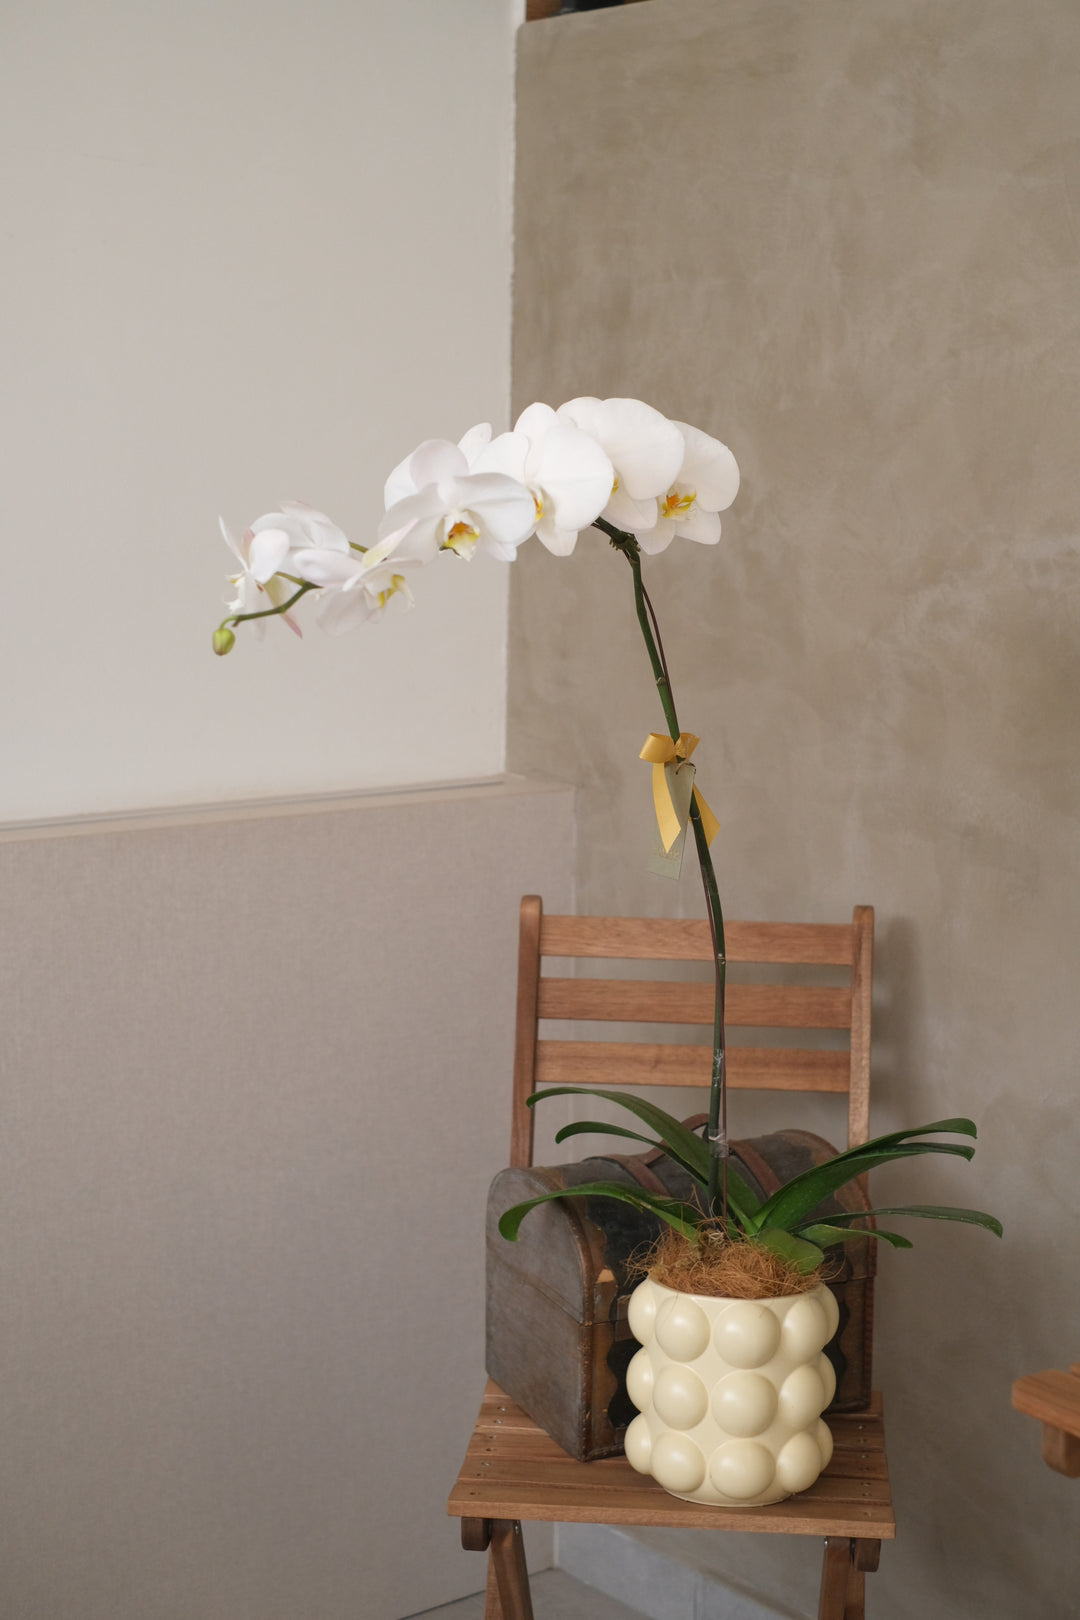 Love Being Your'chid - Phalaenopsis Orchid